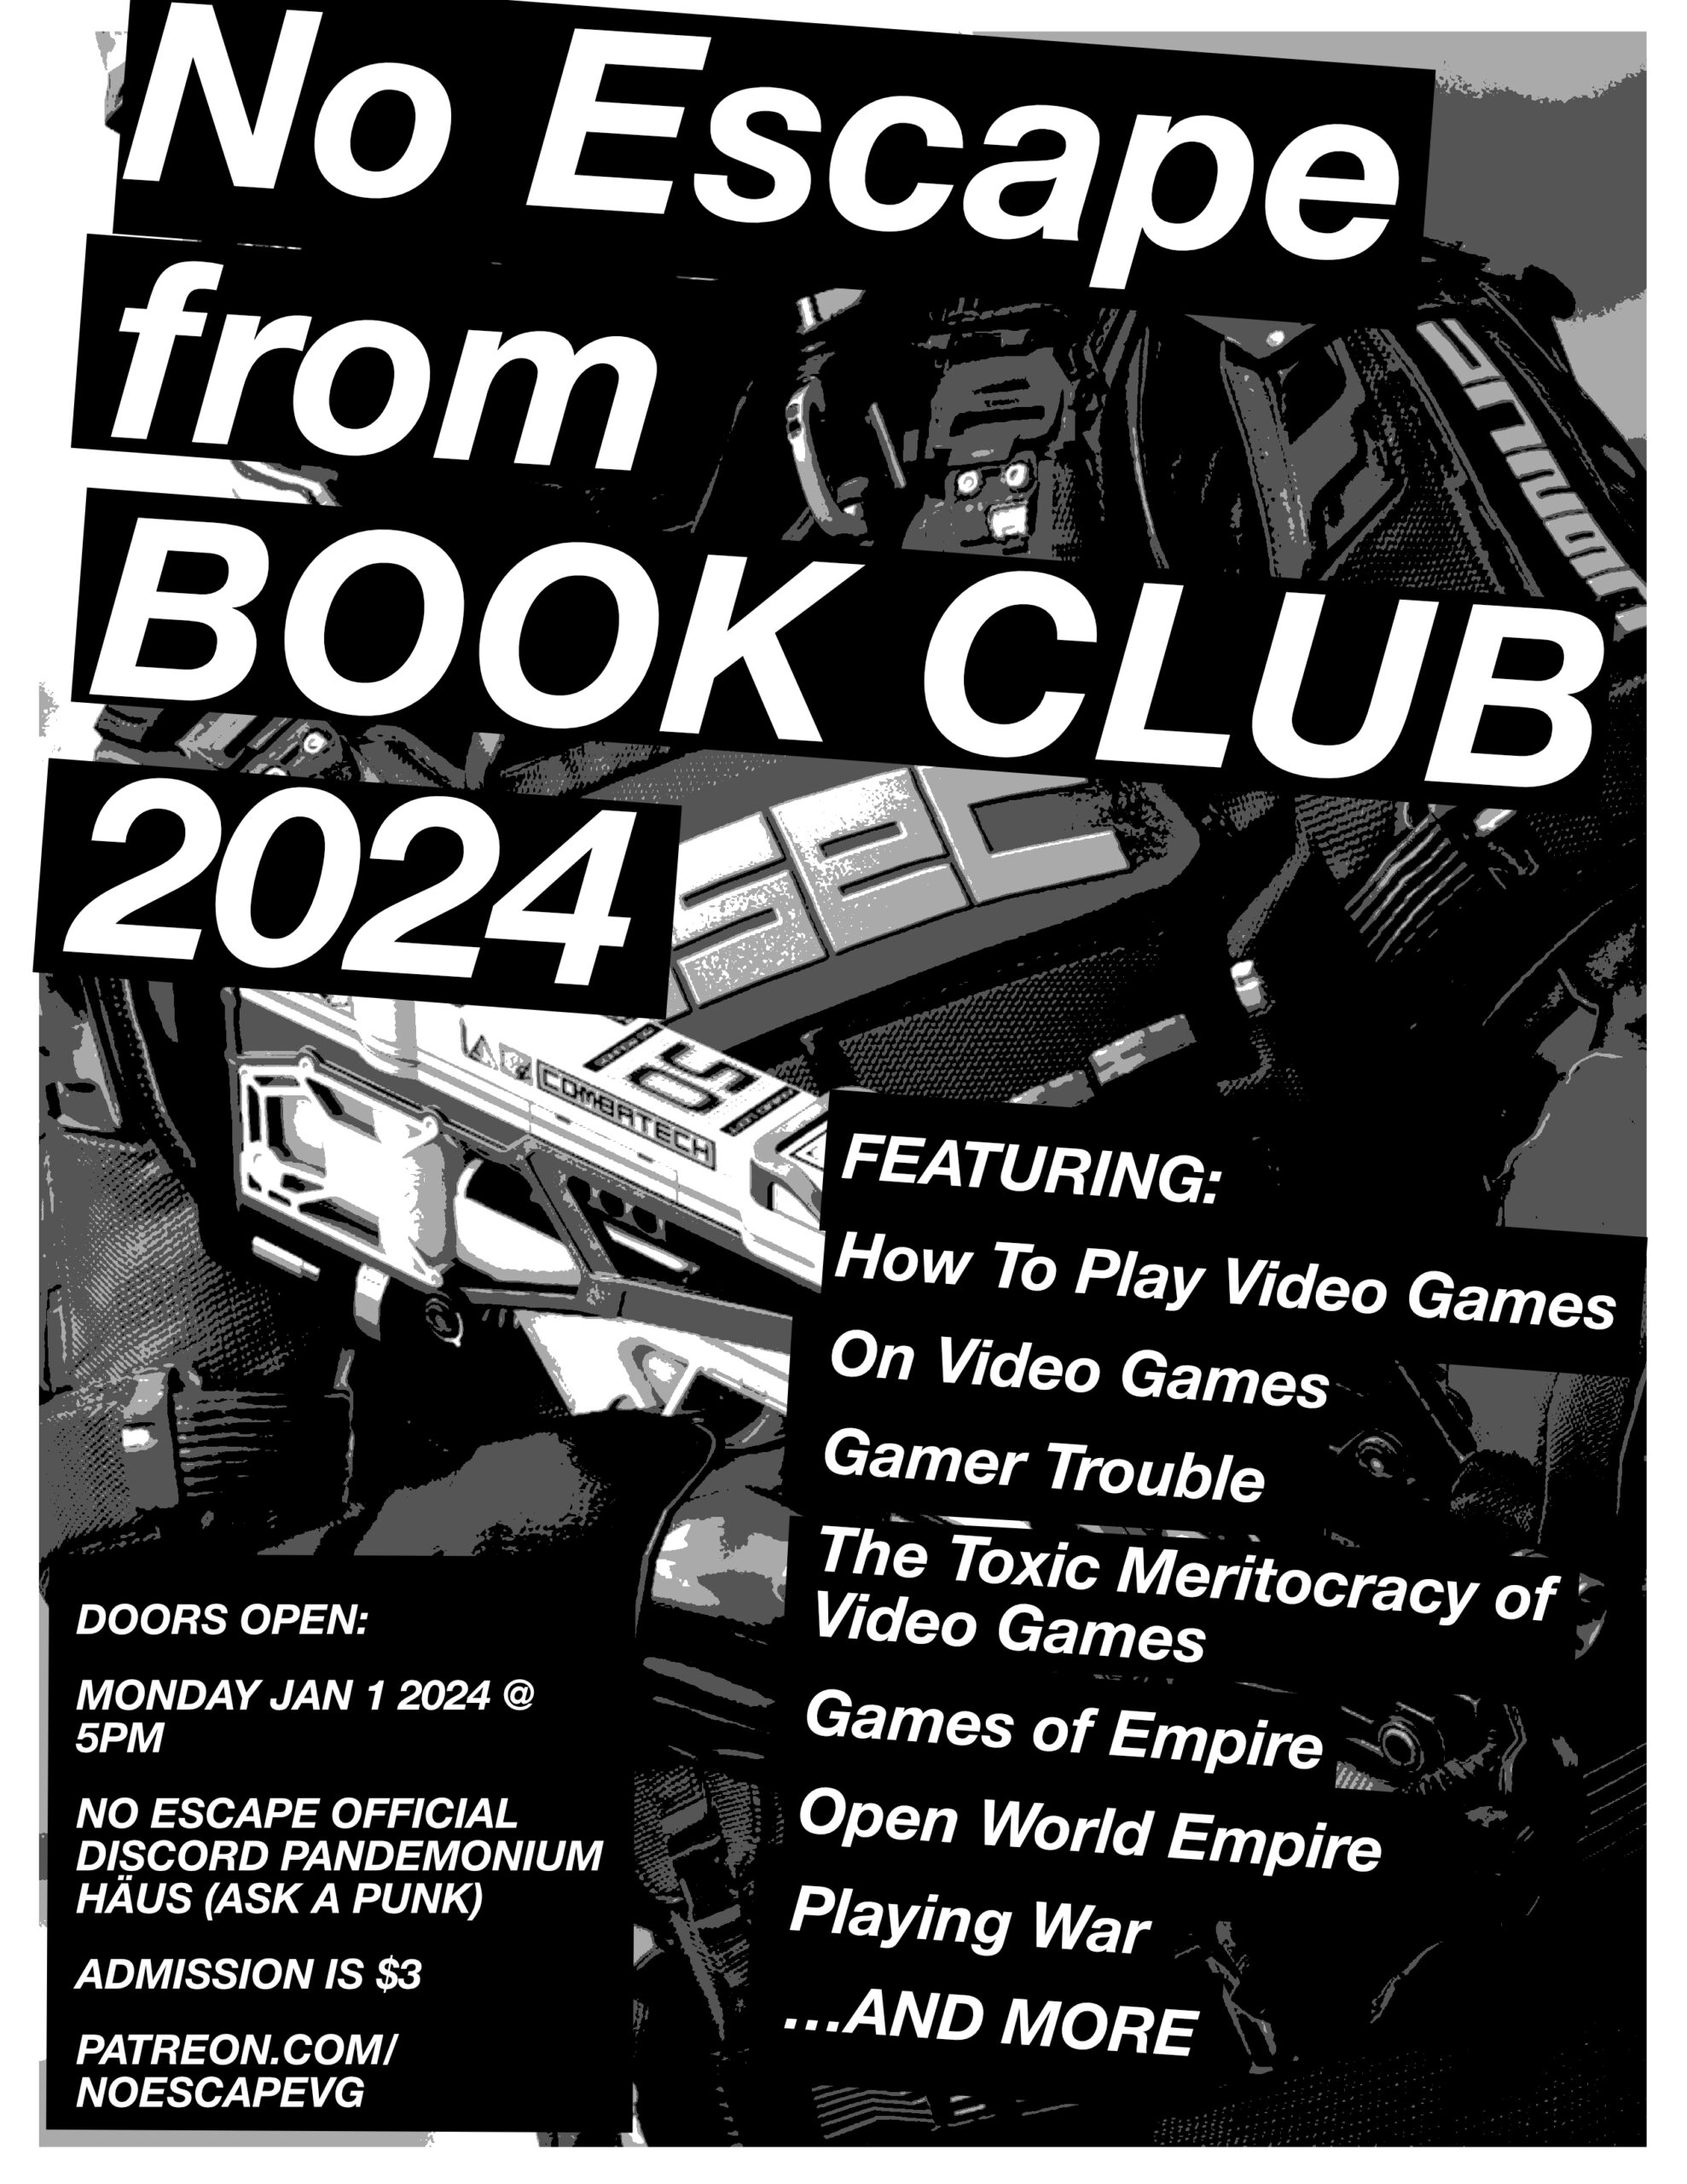 TONIGHT: No Escape From Book Club 2024’s First Meeting!